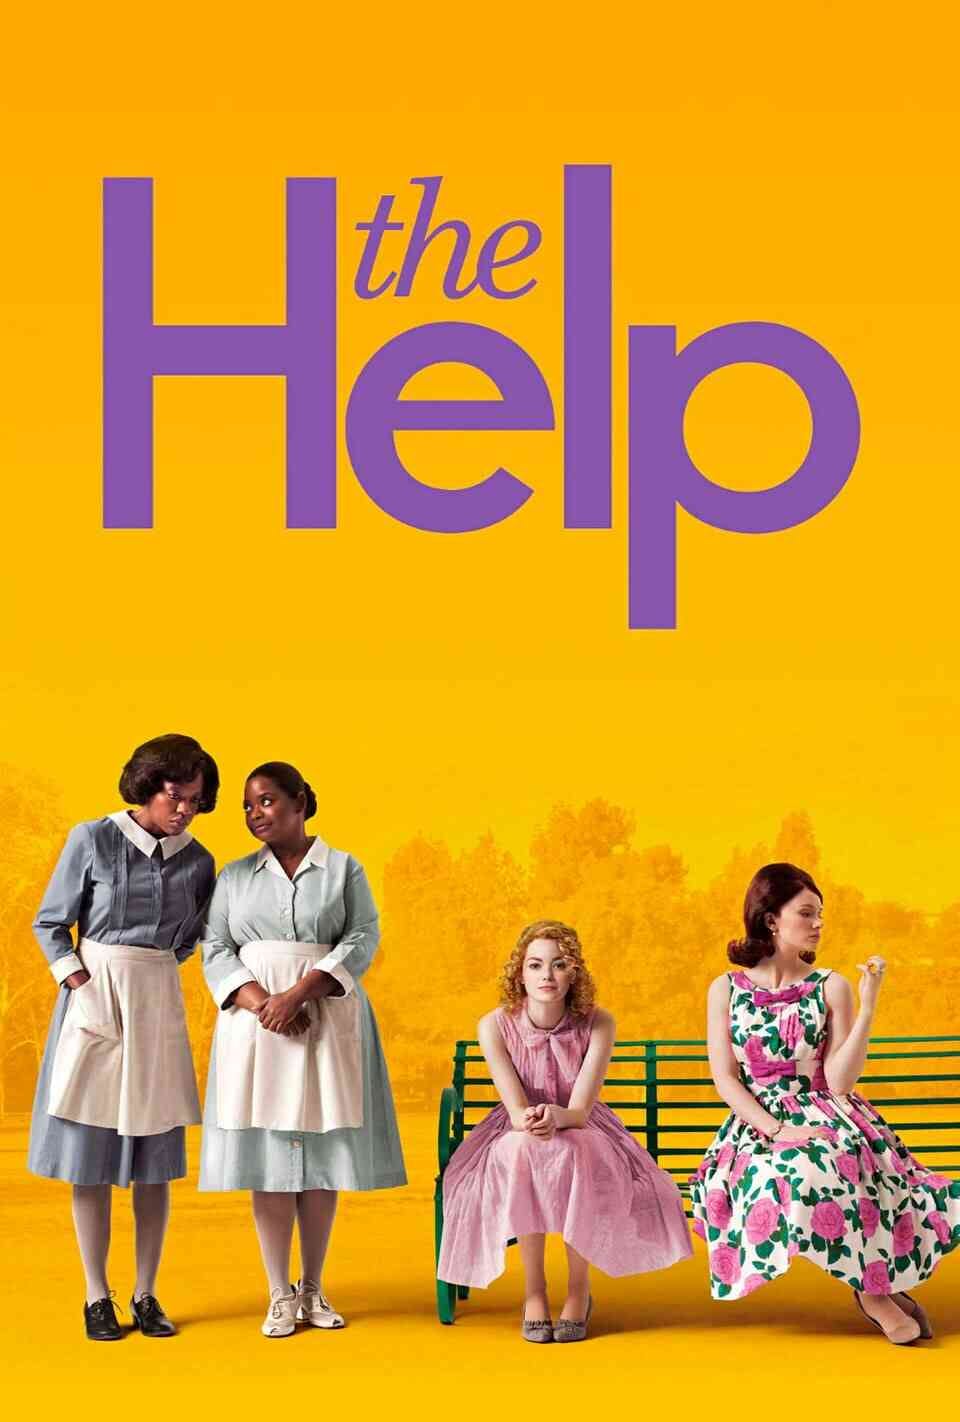 Read The Help screenplay (poster)